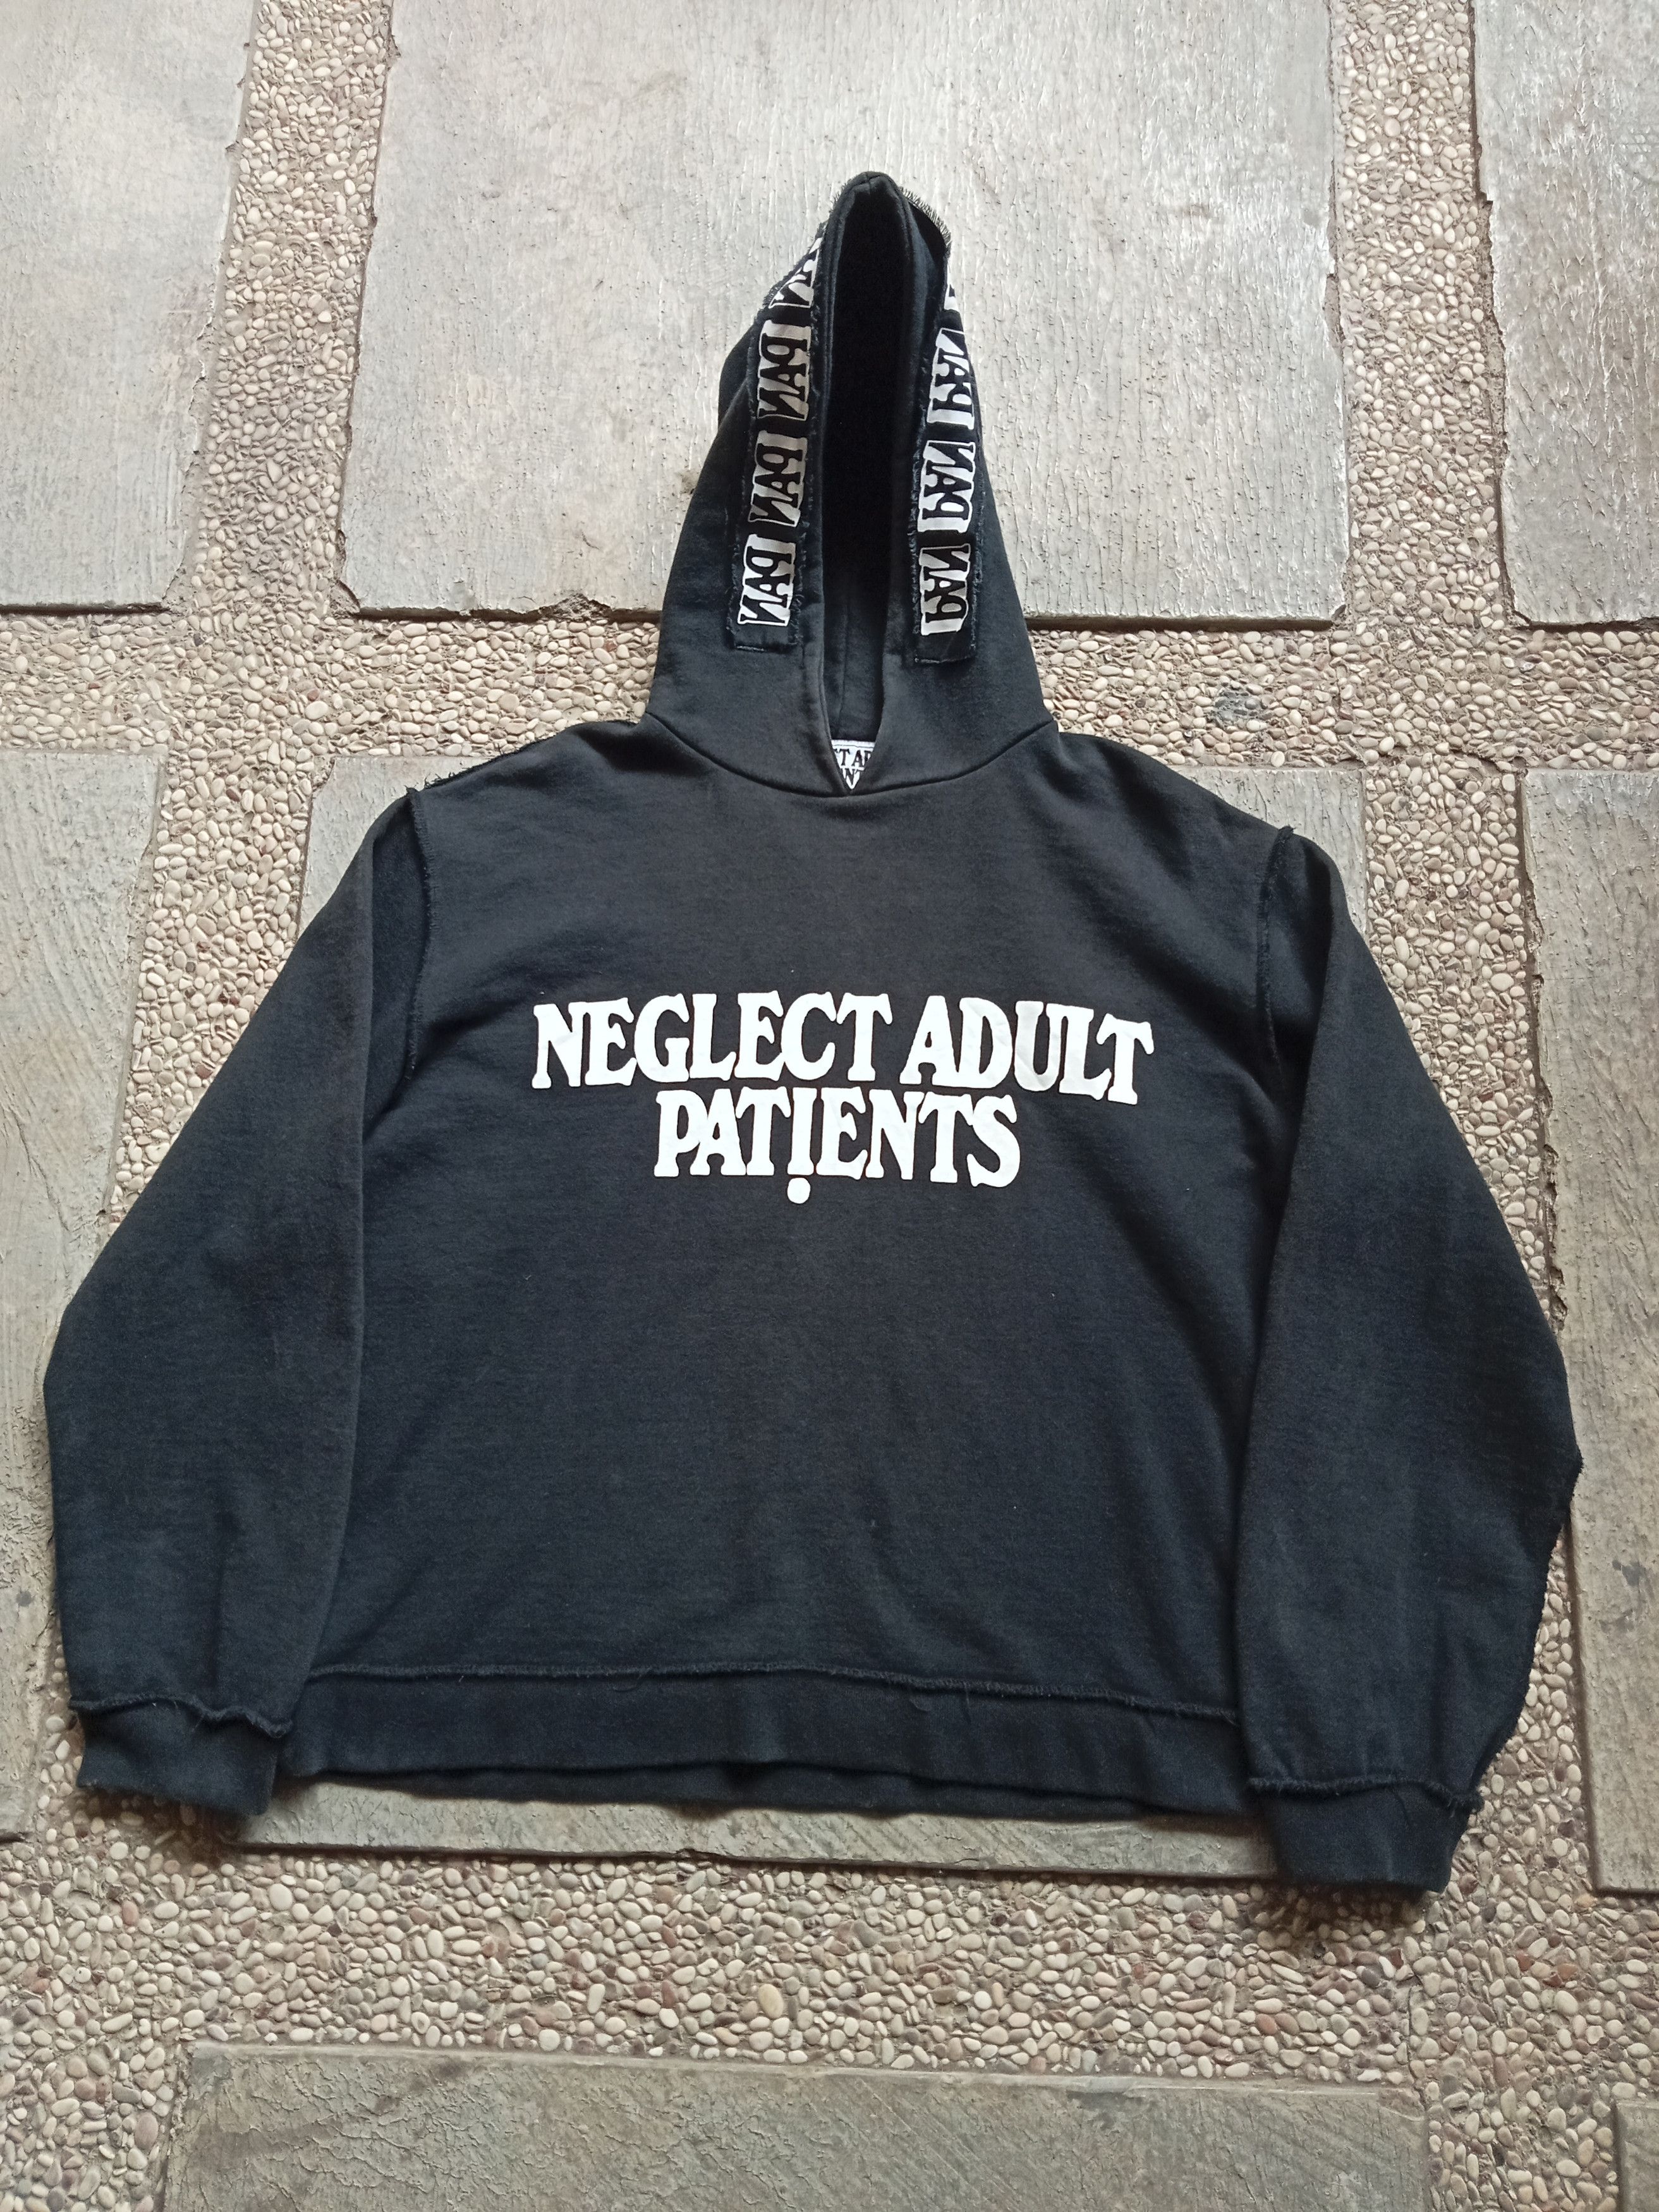 Japanese Brand Neglect Adult Patients Punk Hoodie | Grailed